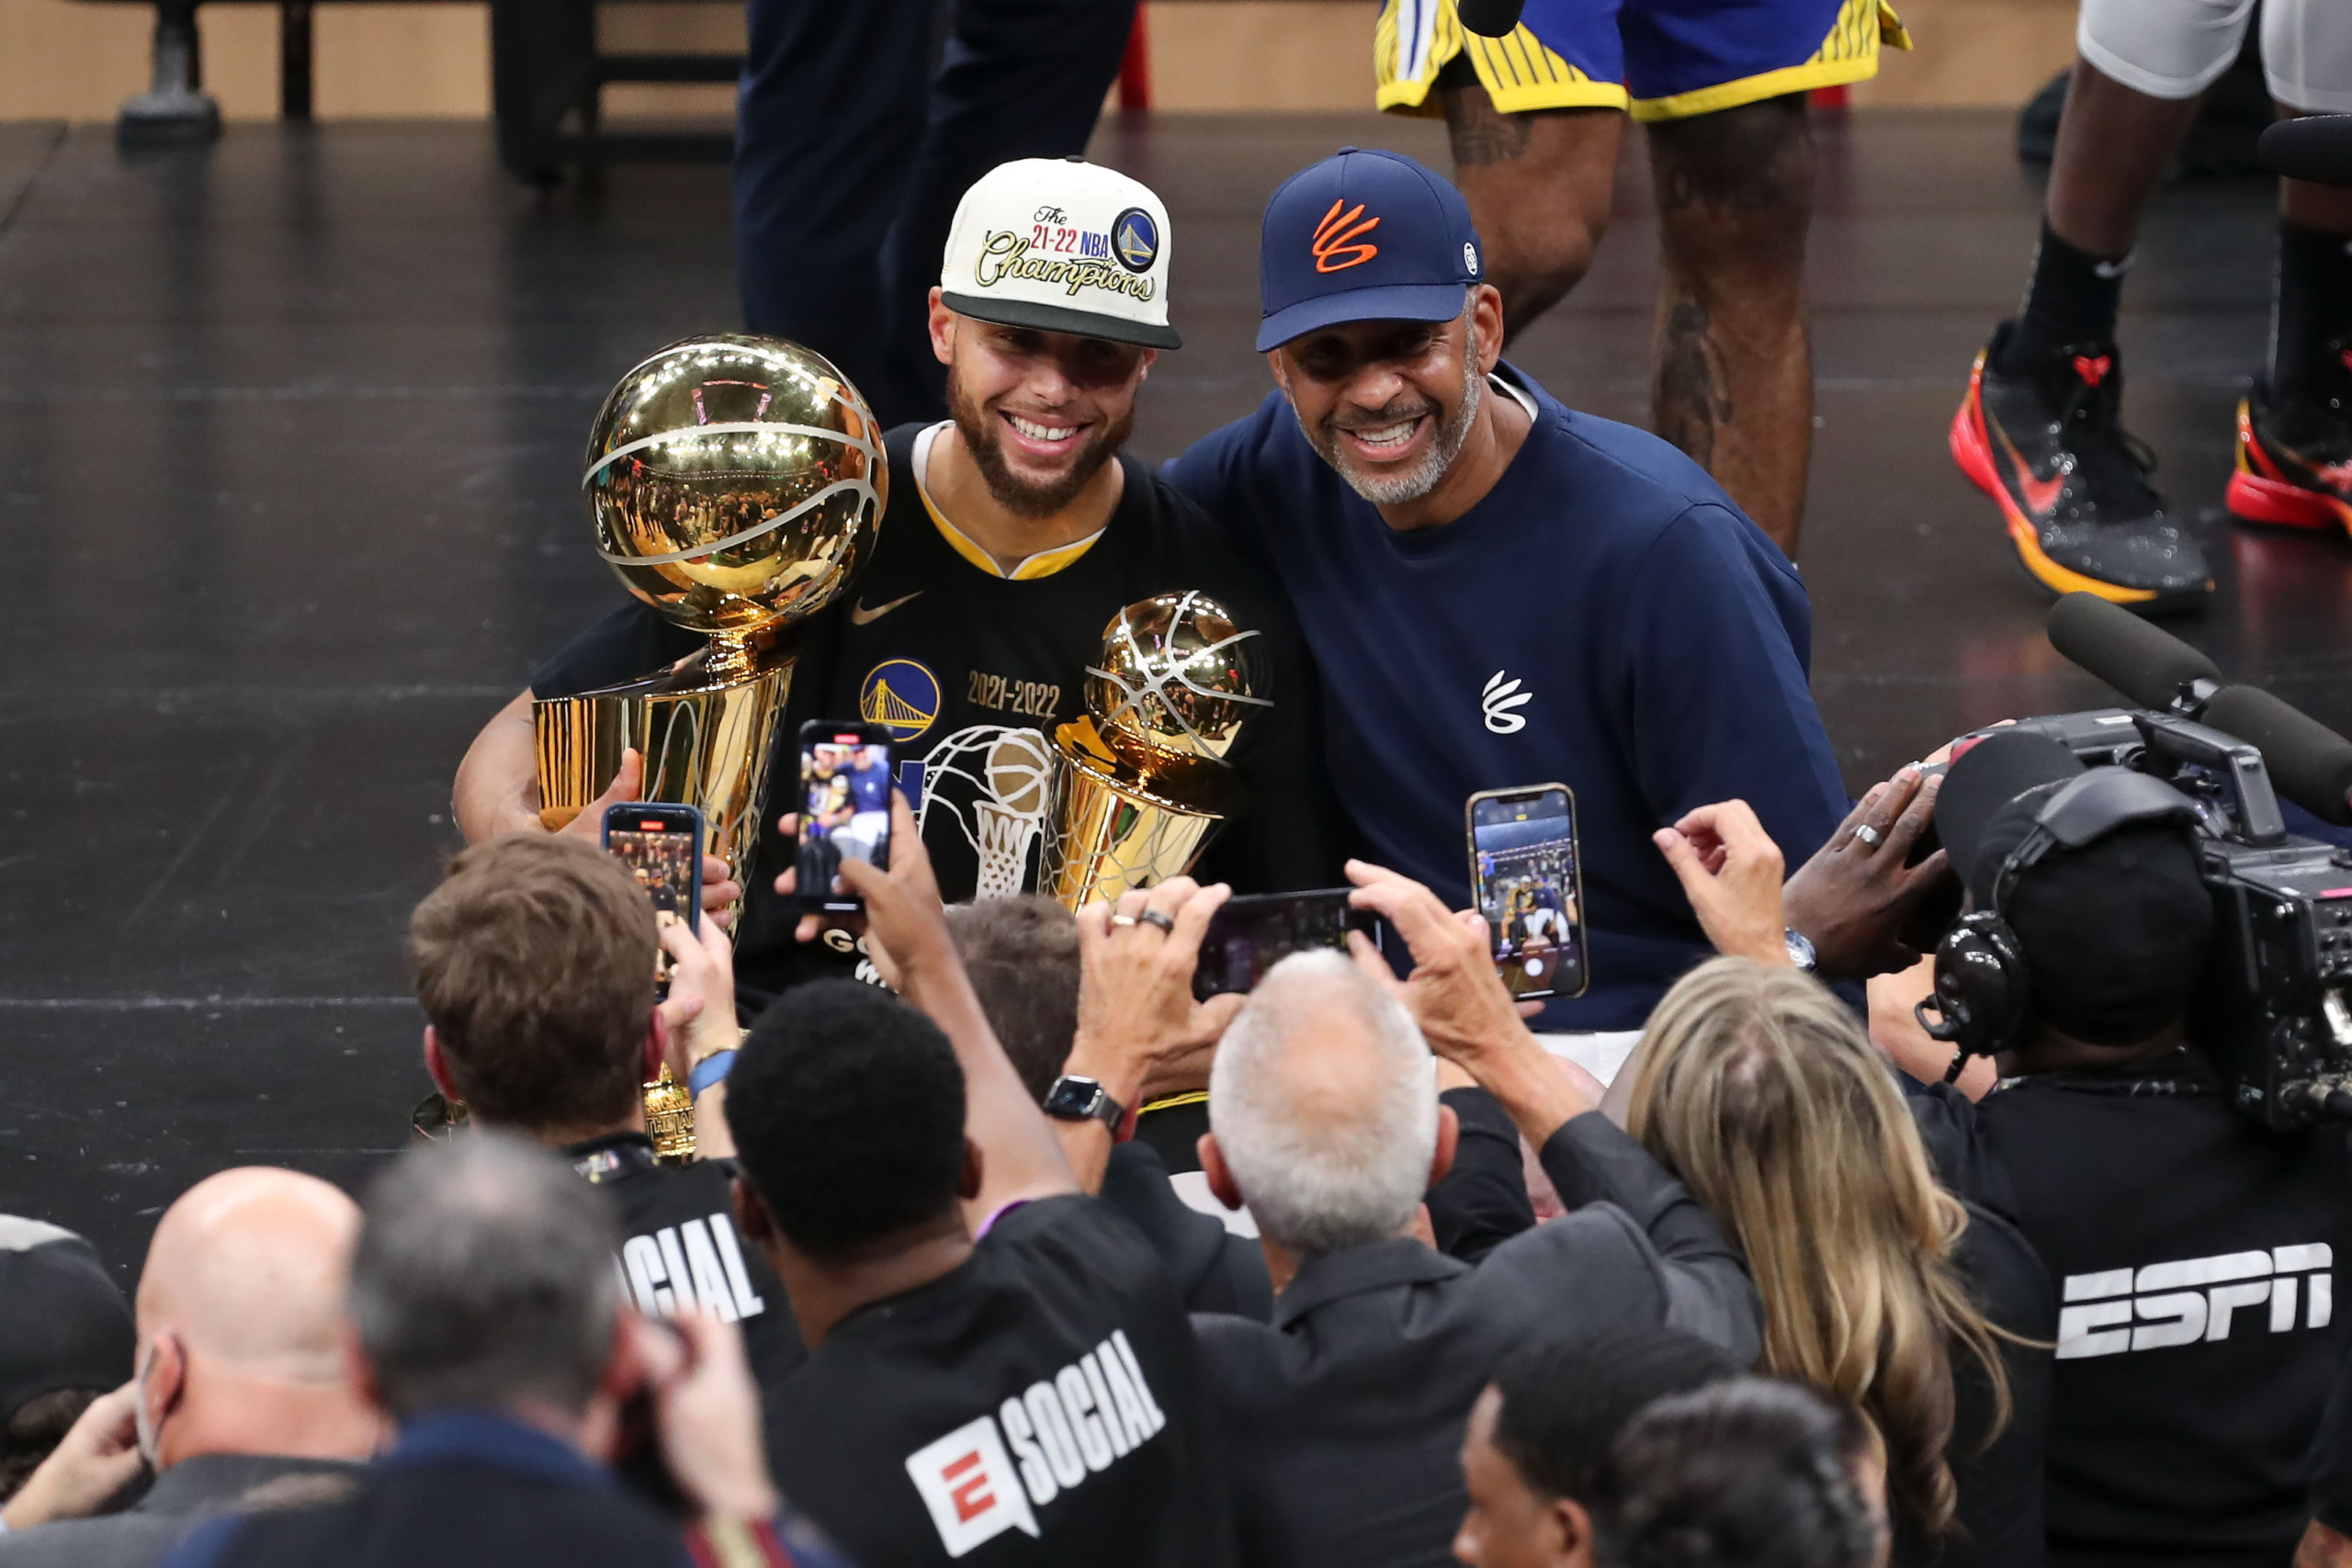 NBA Finals odds: Every team’s championship futures for 2022-23 NBA season